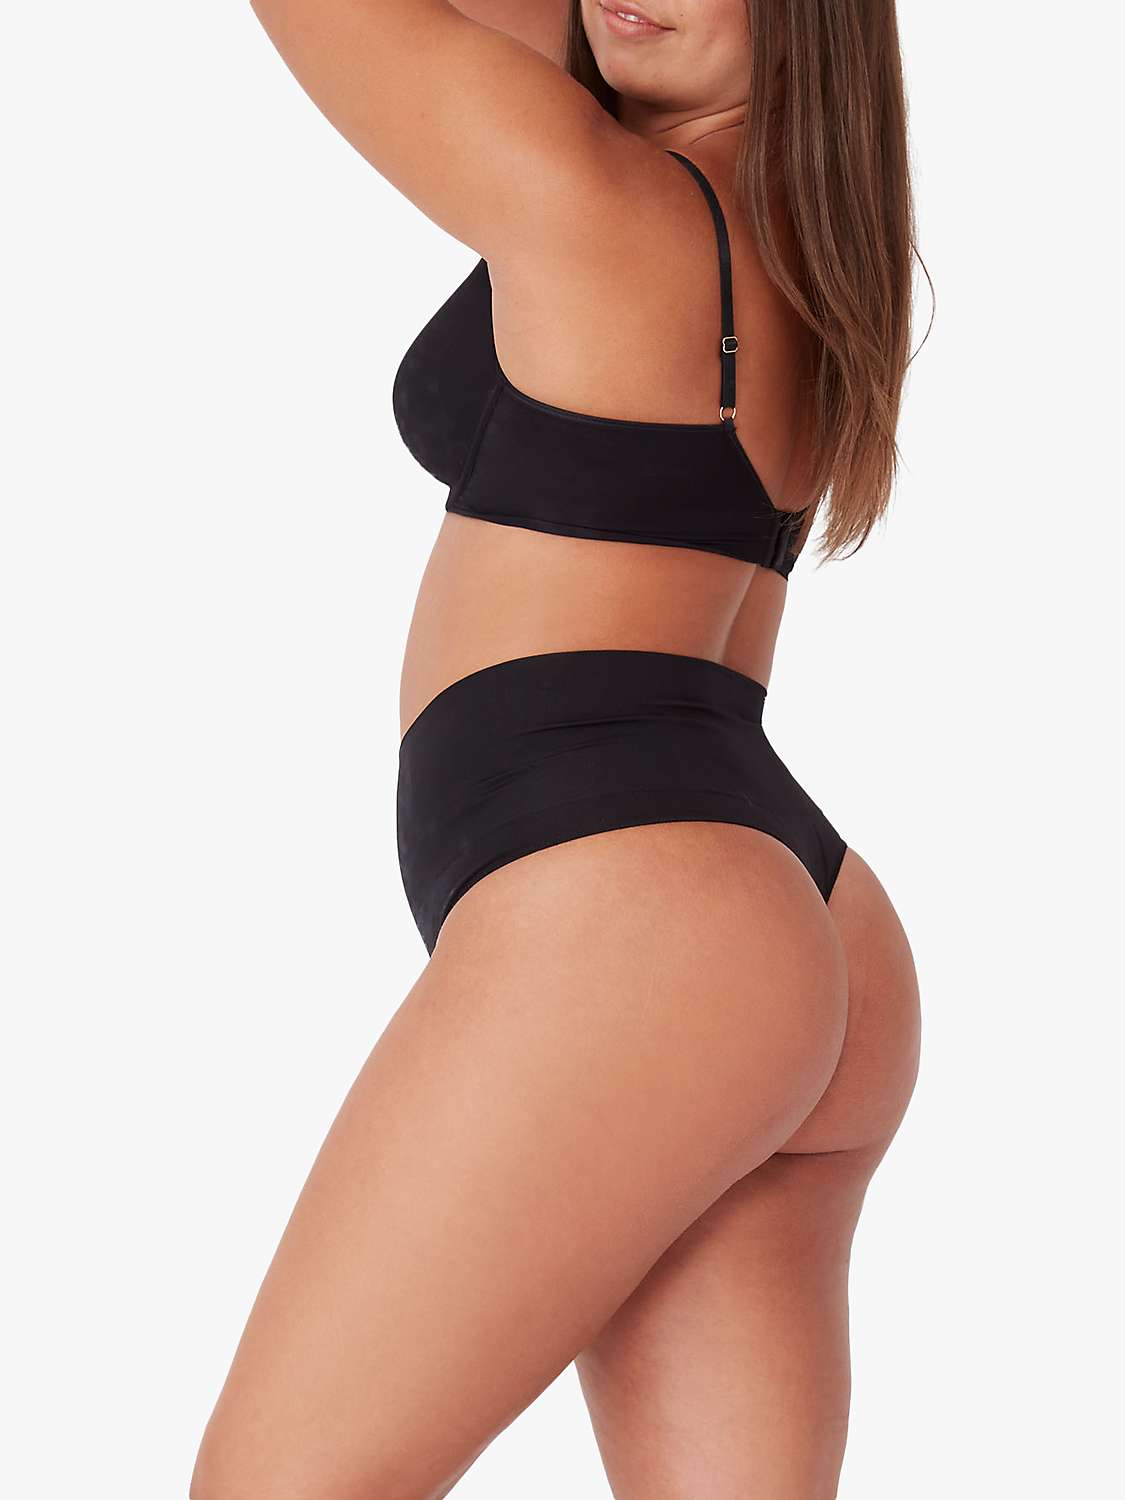 Buy Ambra Seamless Smoothies G String Briefs, Pack of 2 Online at johnlewis.com